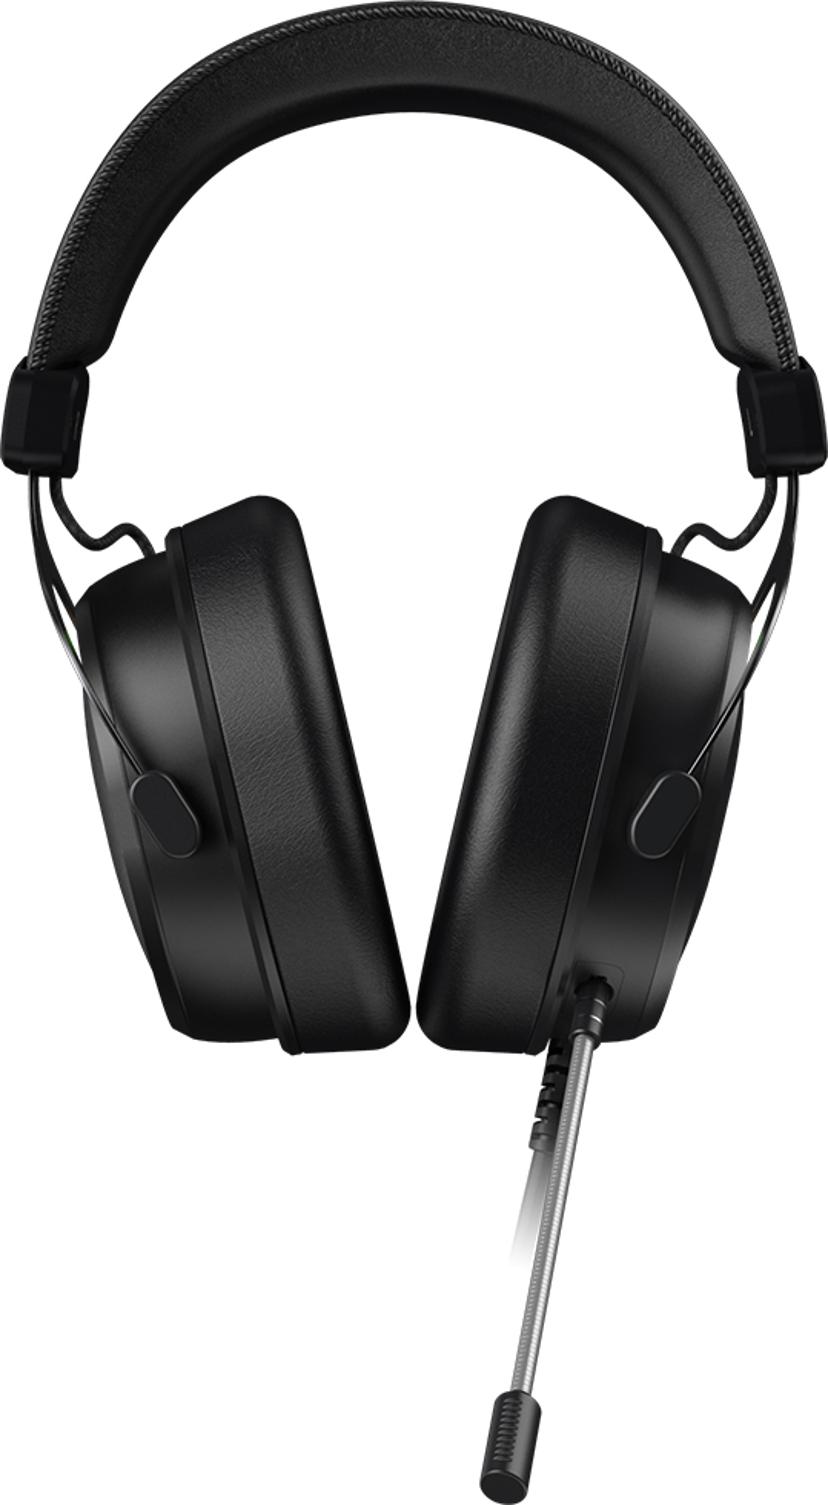 Voxicon GR8-G24 RGB Gaming Headset Surround